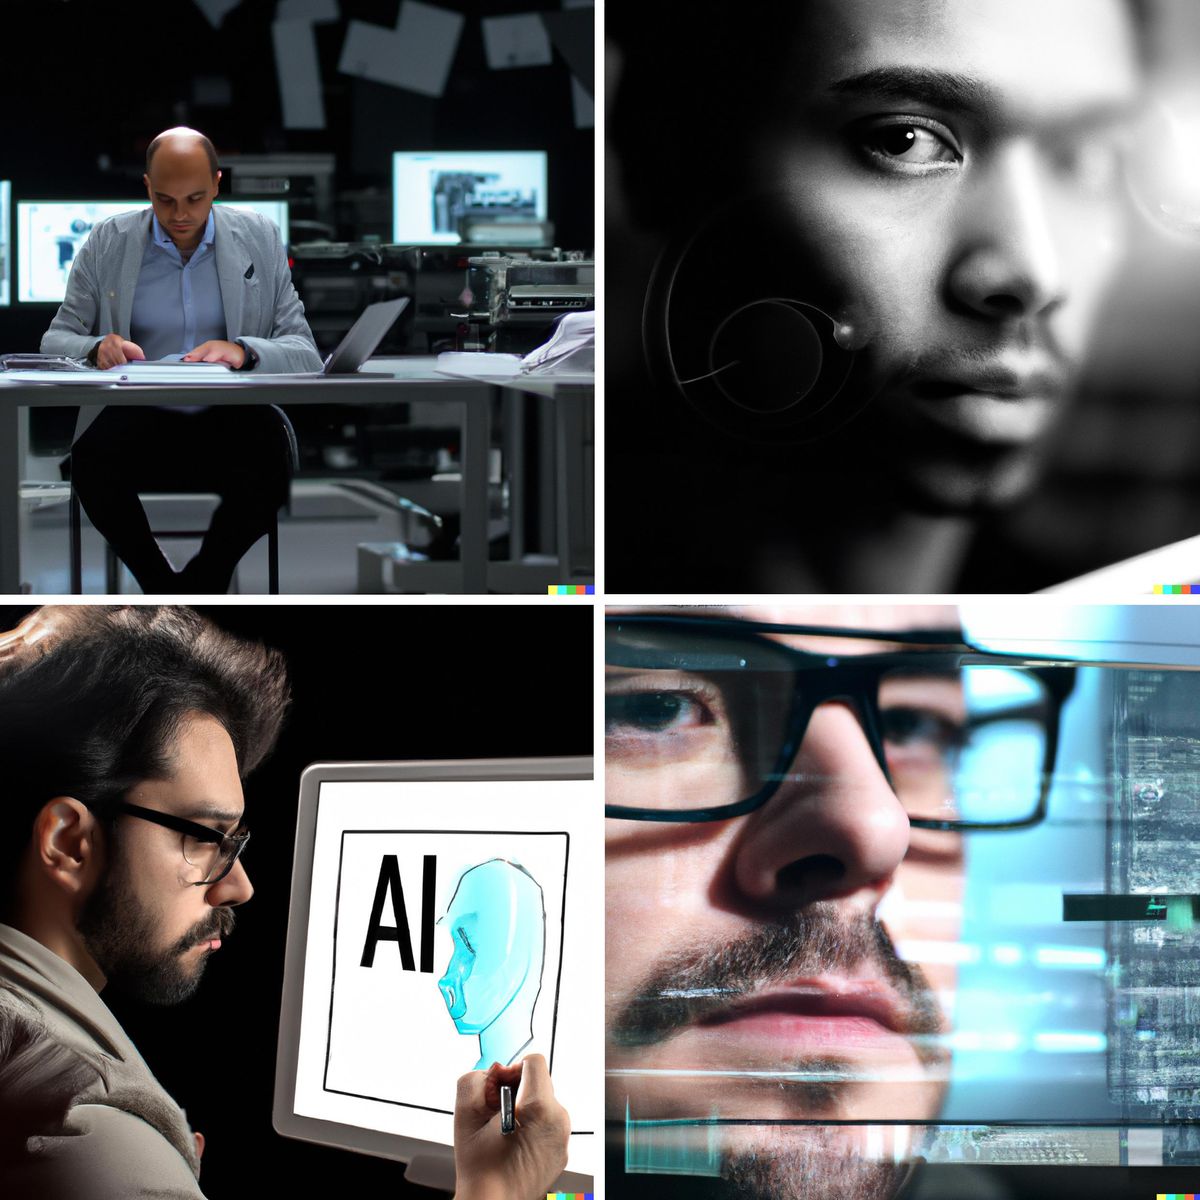 Four photorealistic images of men. One is sitting at a desk in an office environment, one is shown drawing on a computer screen, and two are close-ups of faces.